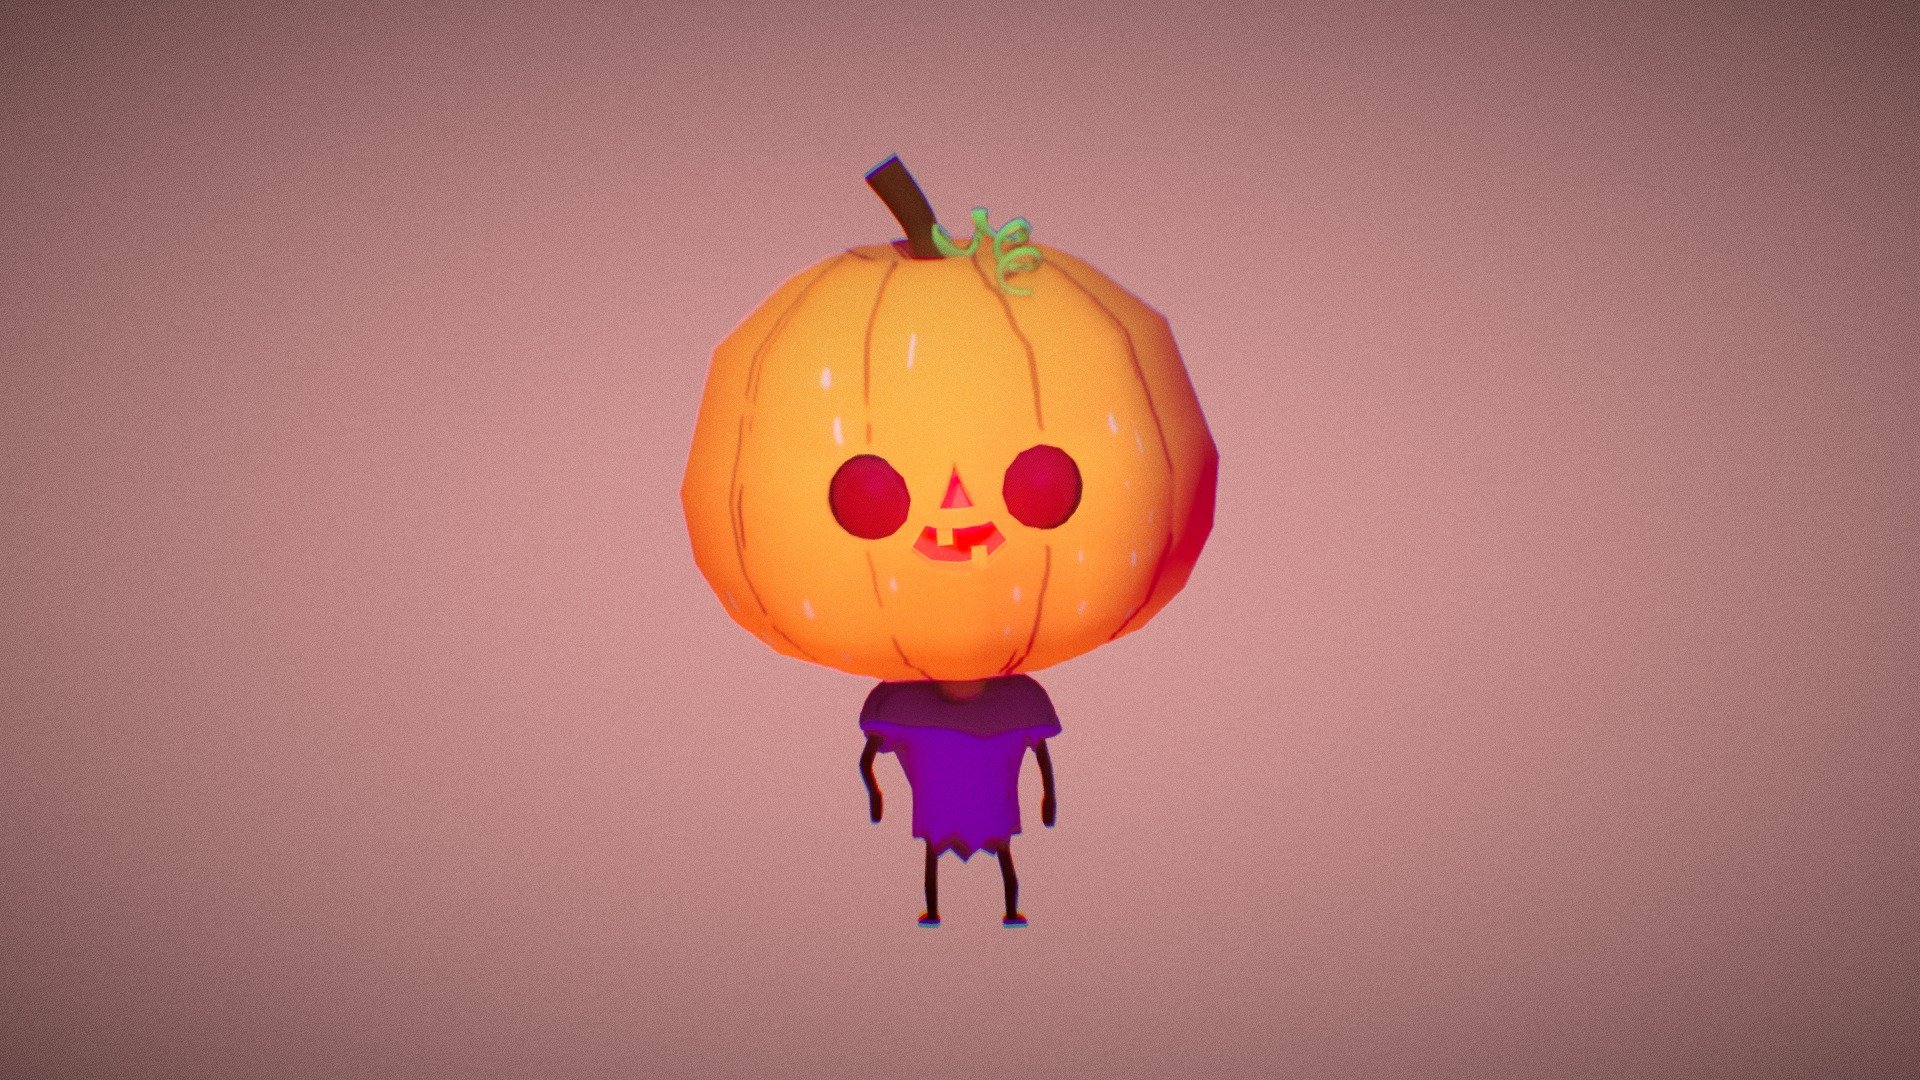 Jack-o-Lantern [GAME READY ASSET]

[Model]
-Low Poly model - 2.6k poly faces/5k tris.
-UV's unwrapped and Non-Overlapping.
-Clean Topology.
-100% Good results for light baking in any game engines.

[Textures]
-Model comes with 2K PBR textures (includes BaseColor, Roughness, Ambient Occlusion, Sub-Surface Scattering).
-Tightly packed and optimized textures.

[Animation]
-Rig supports all the Mixamo animation
-Rigged efficiently and named properly. 
-Comes with Idle, Walk,Run and Dance animation&hellip;although any animation in mixamo will work for this character.

[File Format]
.fbx file included, please contact me if you require maya format 3d model